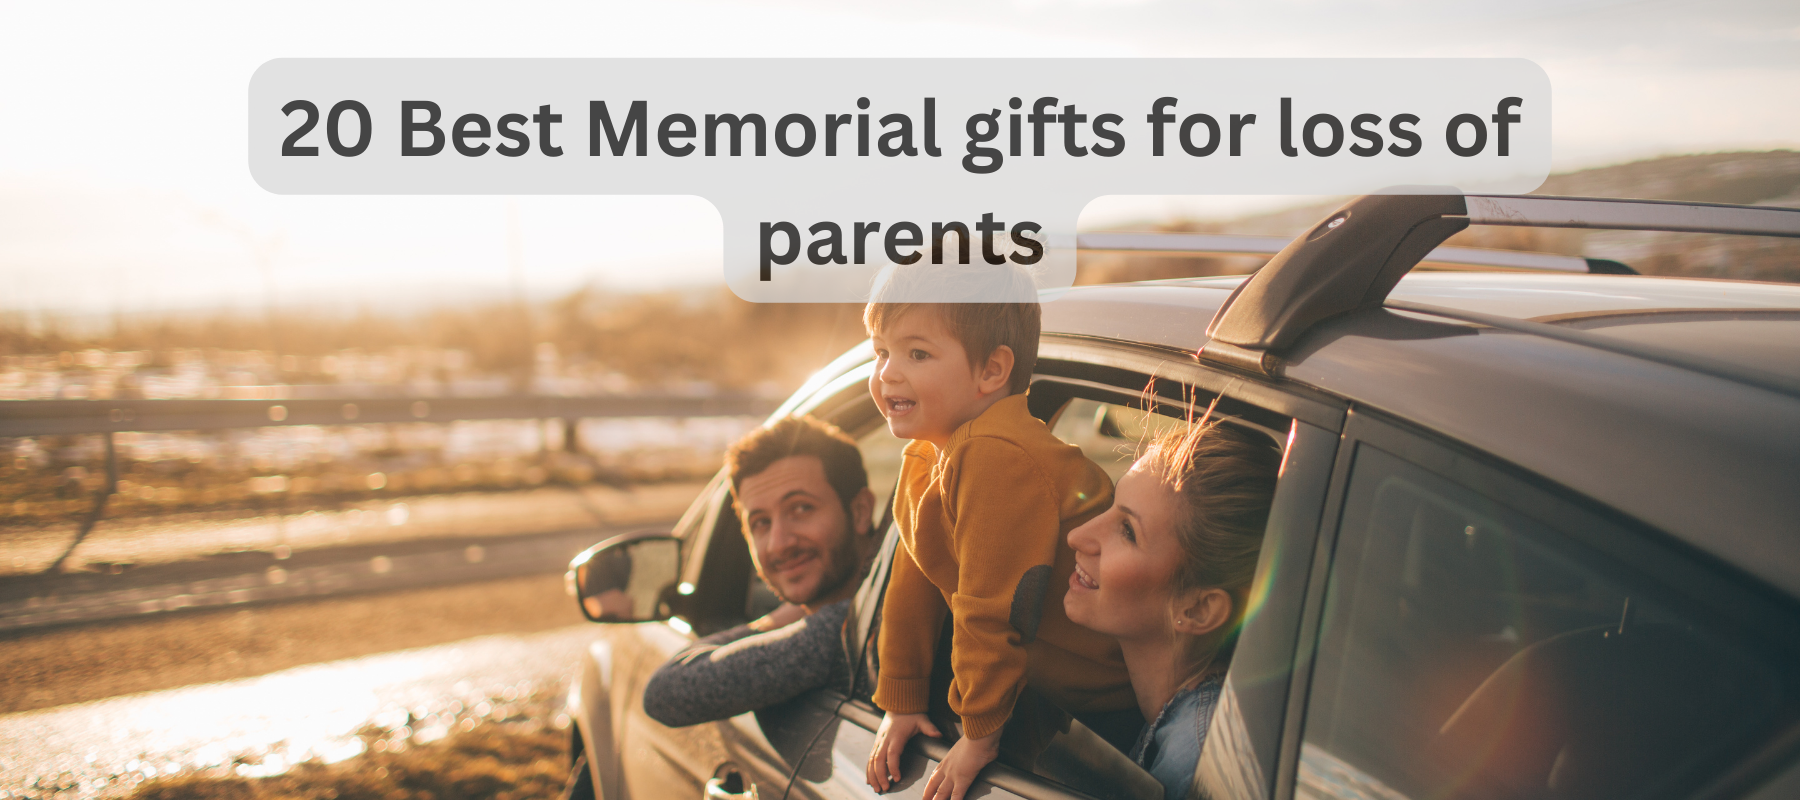 20 Best Memorial gifts for loss of parents